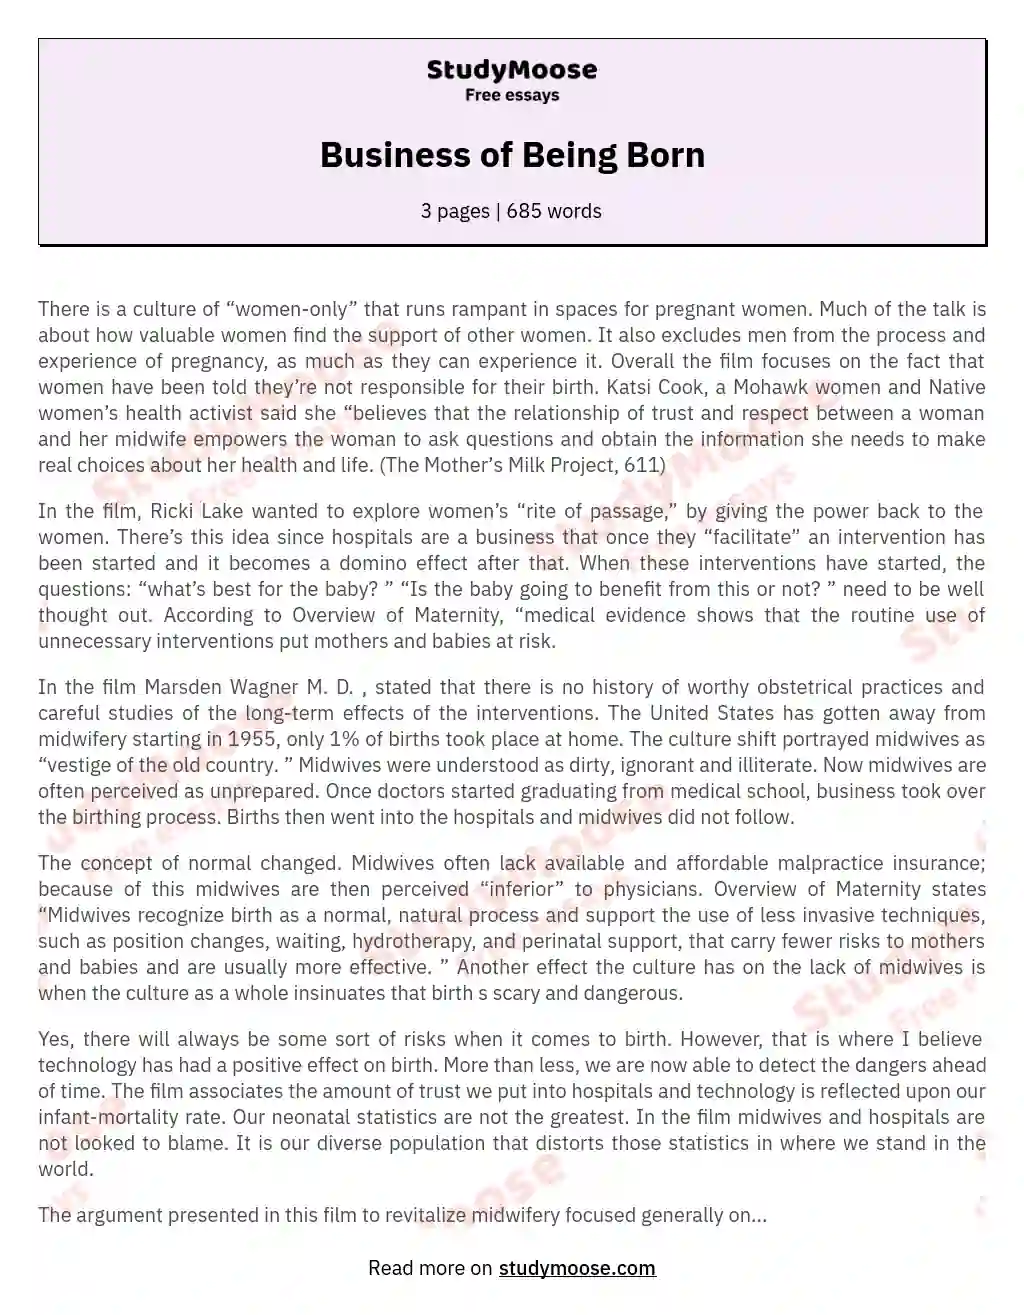 Business of Being Born essay